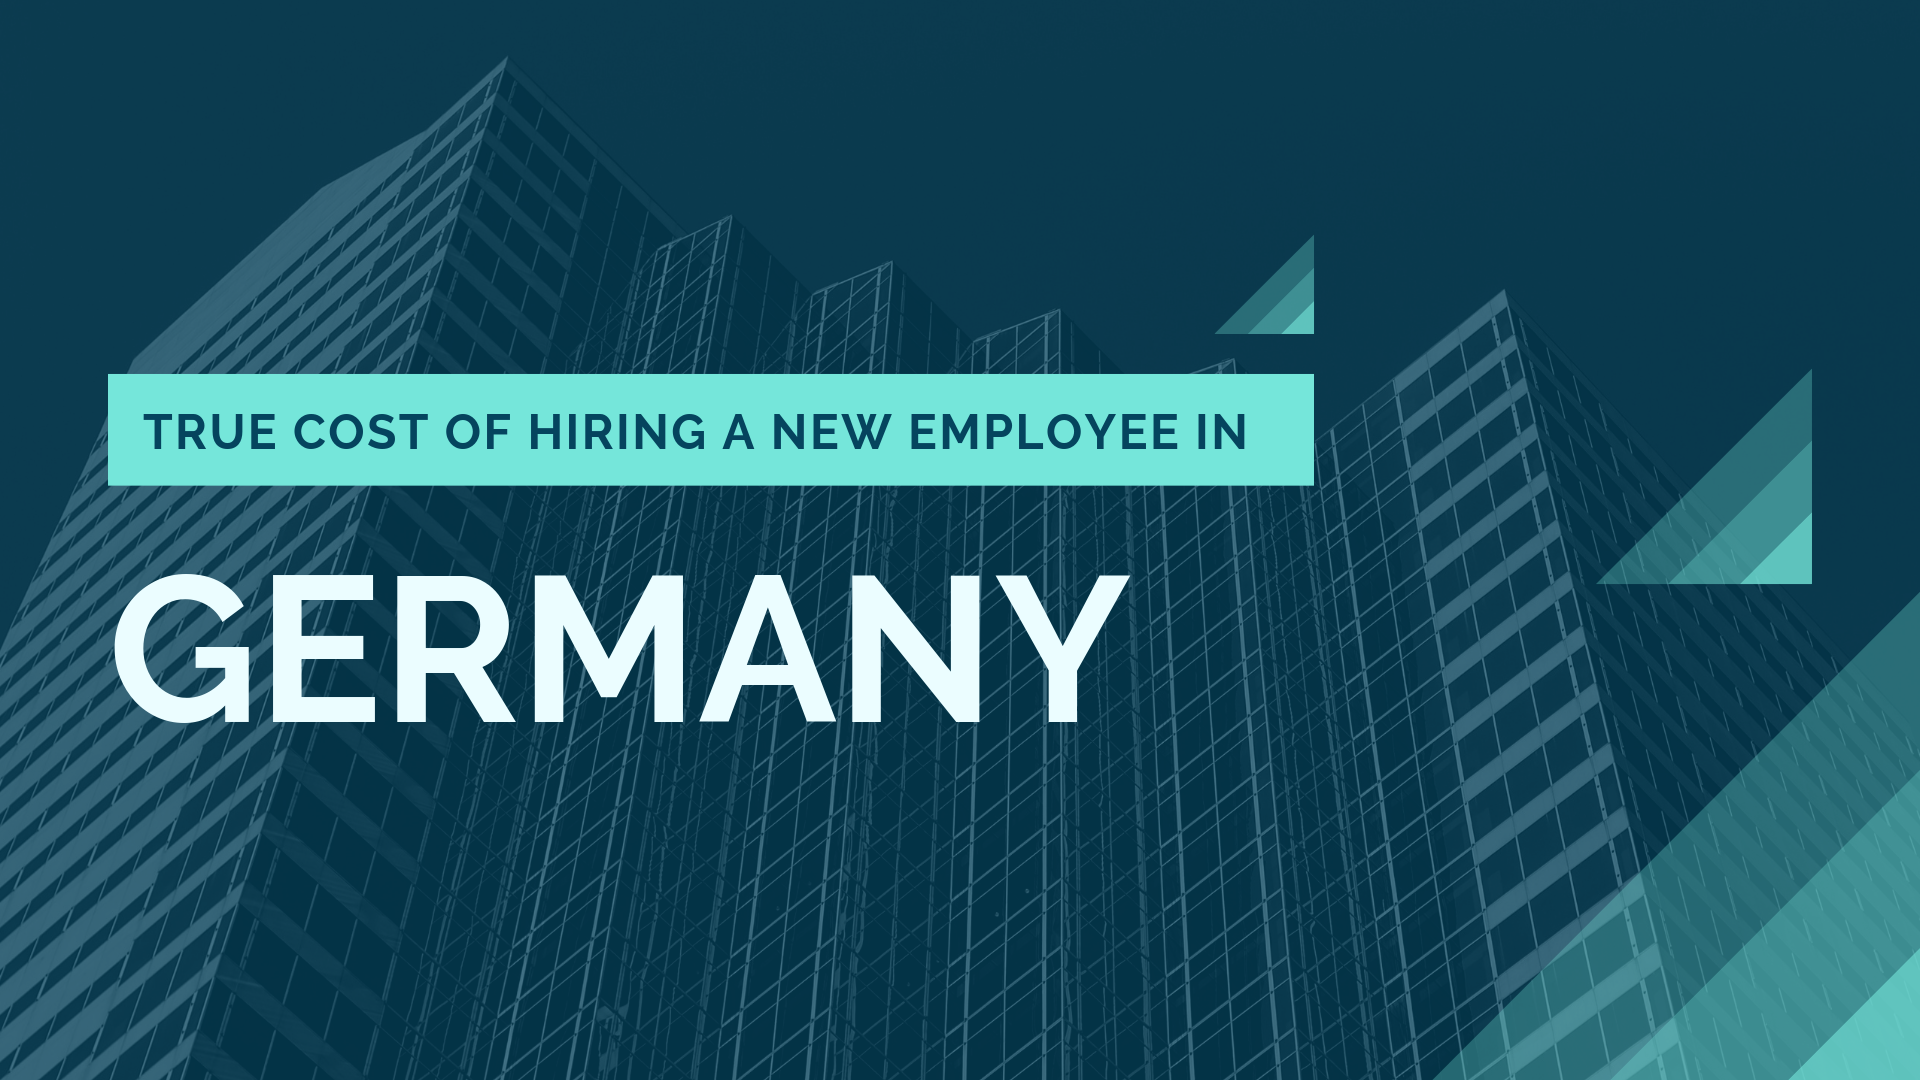 WHAT IS THE TRUE COST OF HIRING A NEW EMPLOYEE IN GERMANY?